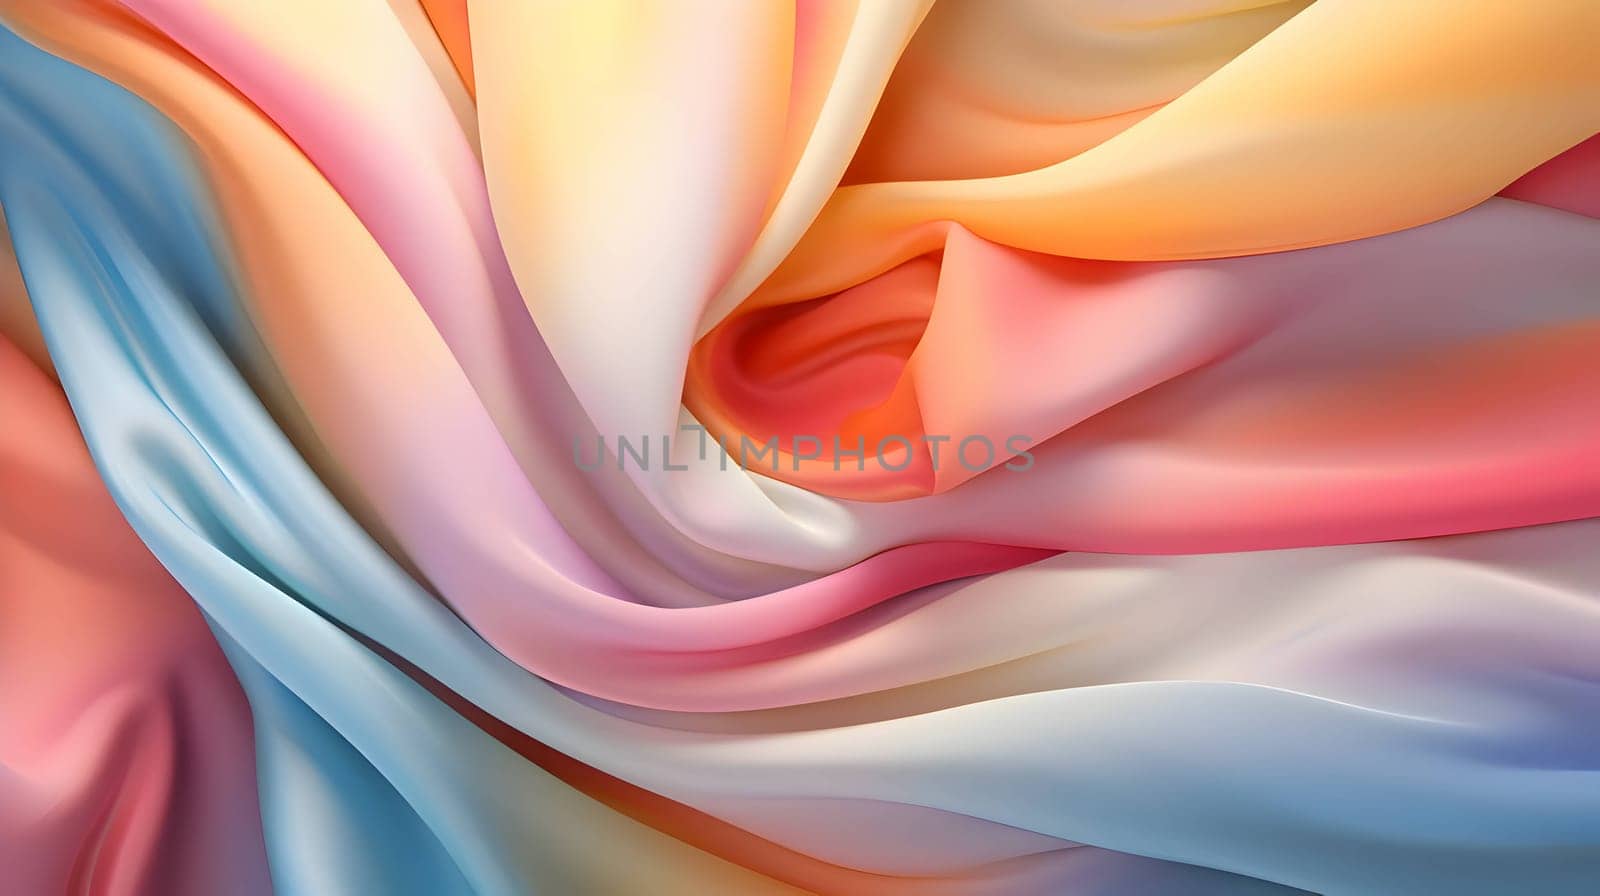 The abstract background wallpaper showcases the texture of rainbow, colorful silk fabric, with elegant folds creating a visually pleasing and tactile impression.